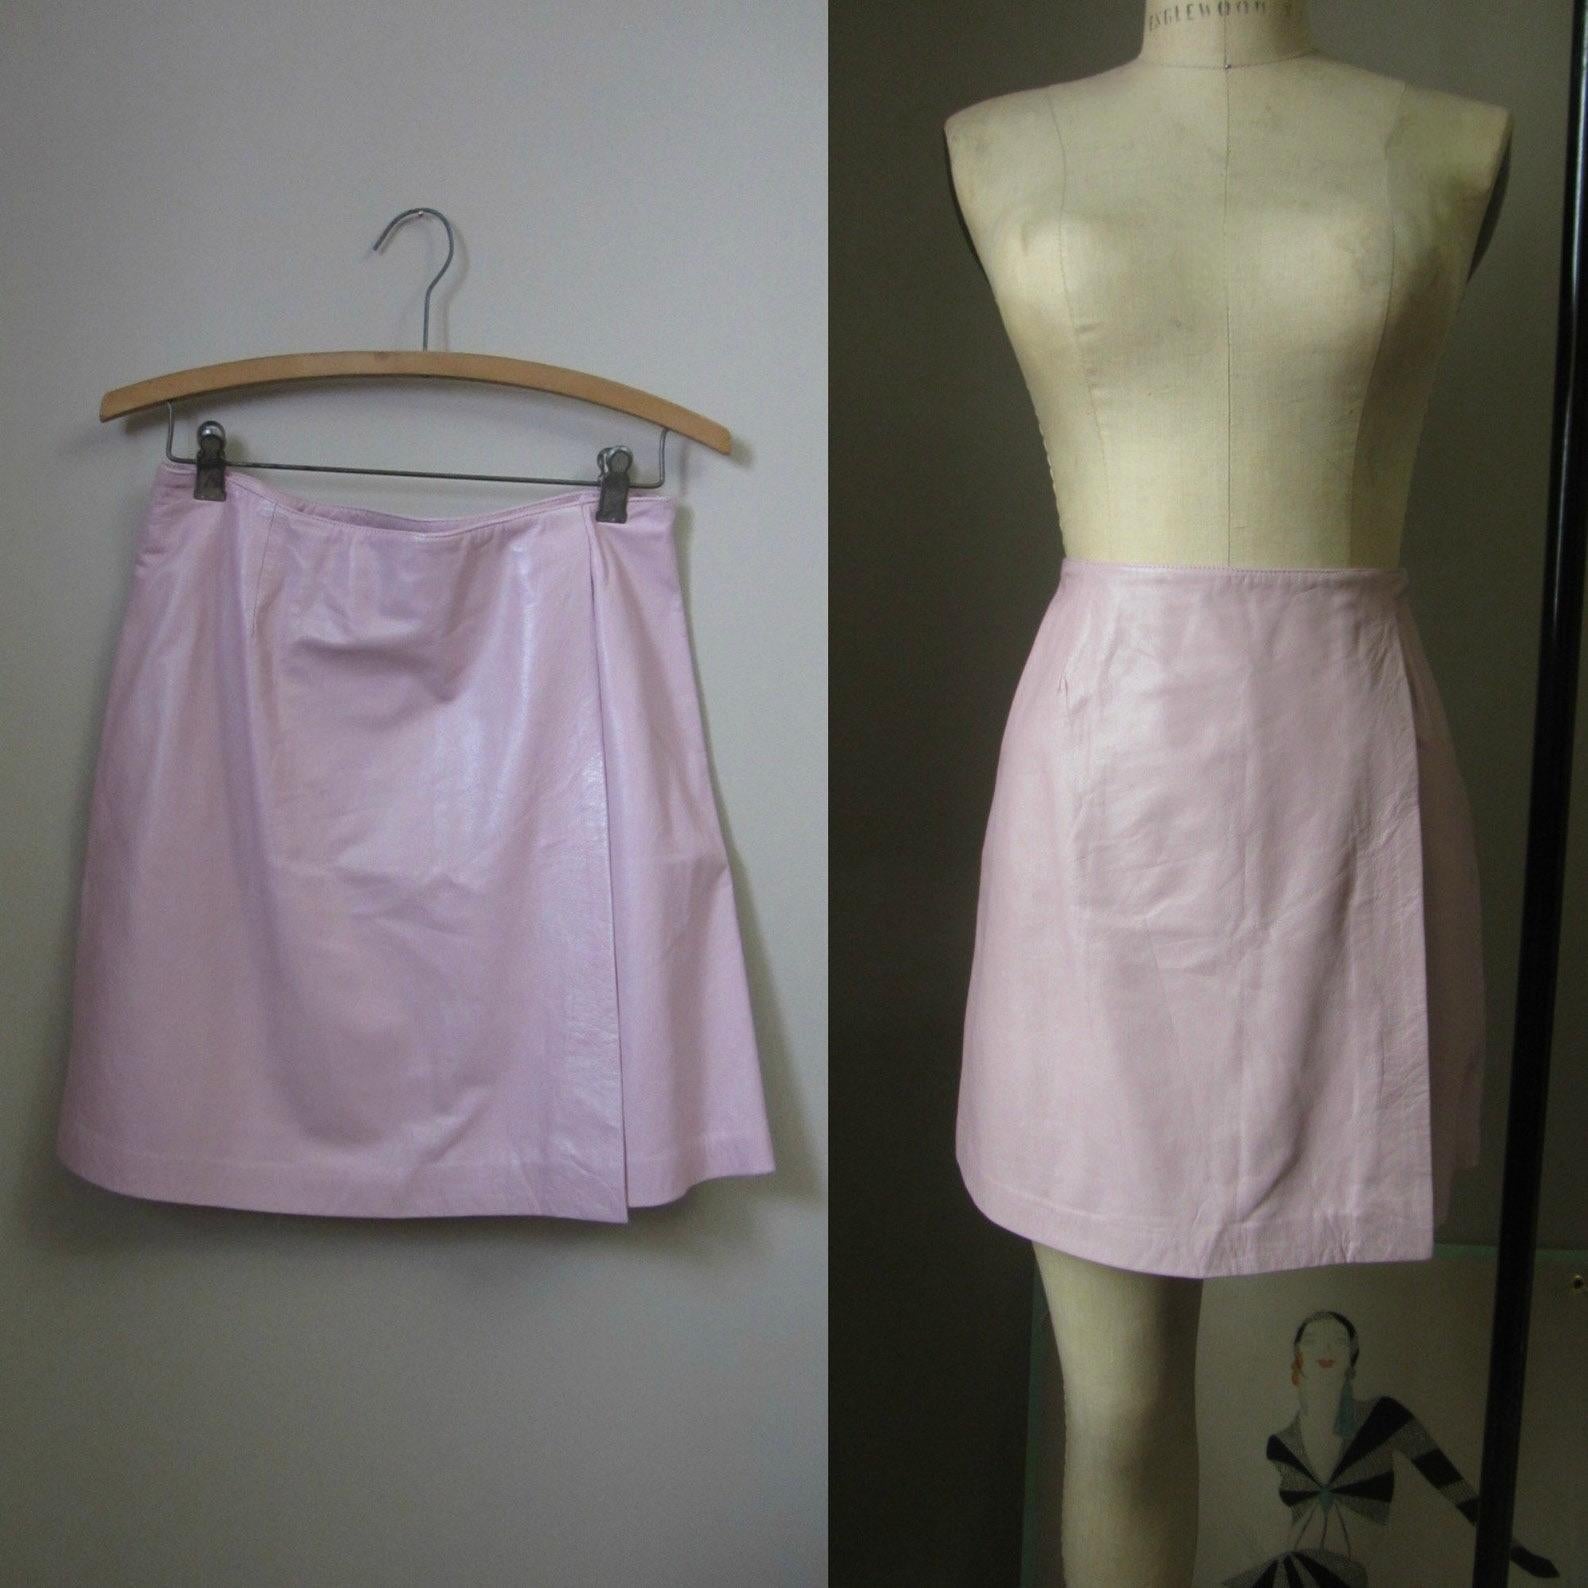 vintage orchid pink leather mini skirt. faux wrap style. a-line silhouette. side zip closure. skirt is lined.

Circa: 1990s
Versus by Gianni Versace
Material - 100% Leather
Orchid Pink
Tagged Size 44 IT 
Made in Italy
Excellent Condition. No notable